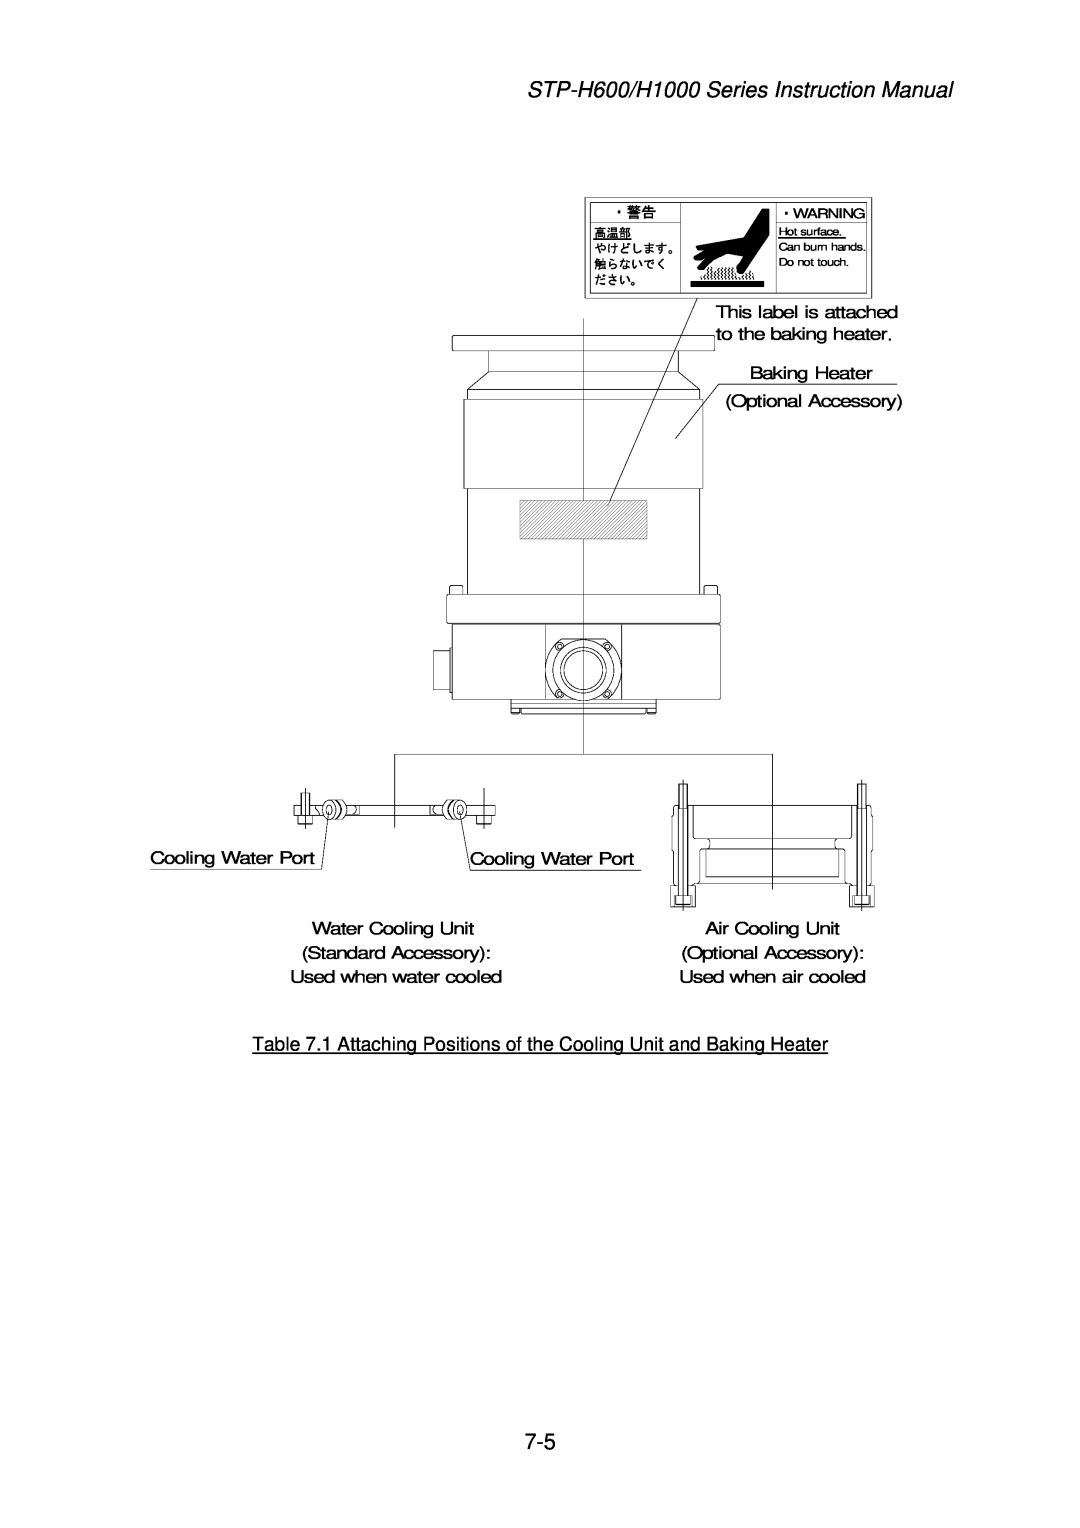 Seiko Instruments MT-17E-003-D instruction manual This label is attached to the baking heater 